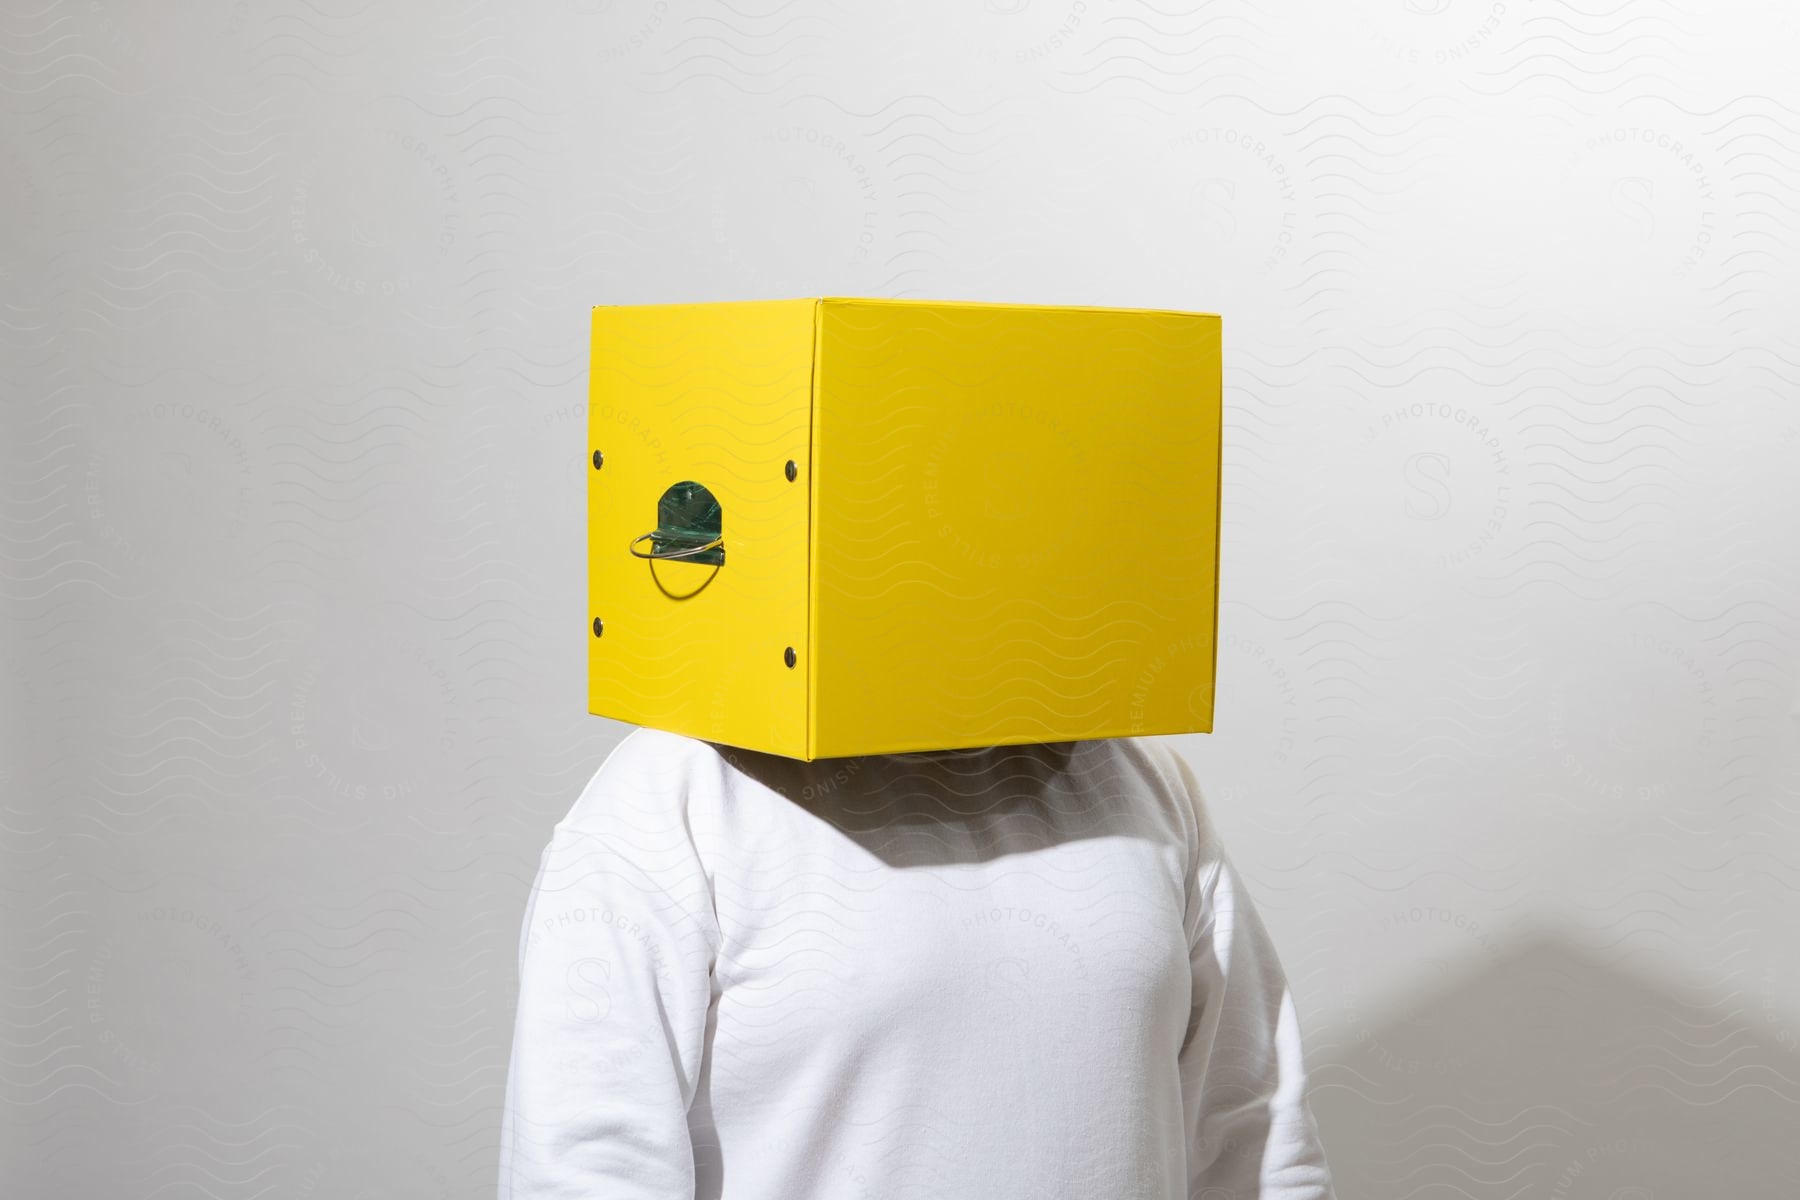 A person performing with a yellow box on their head.